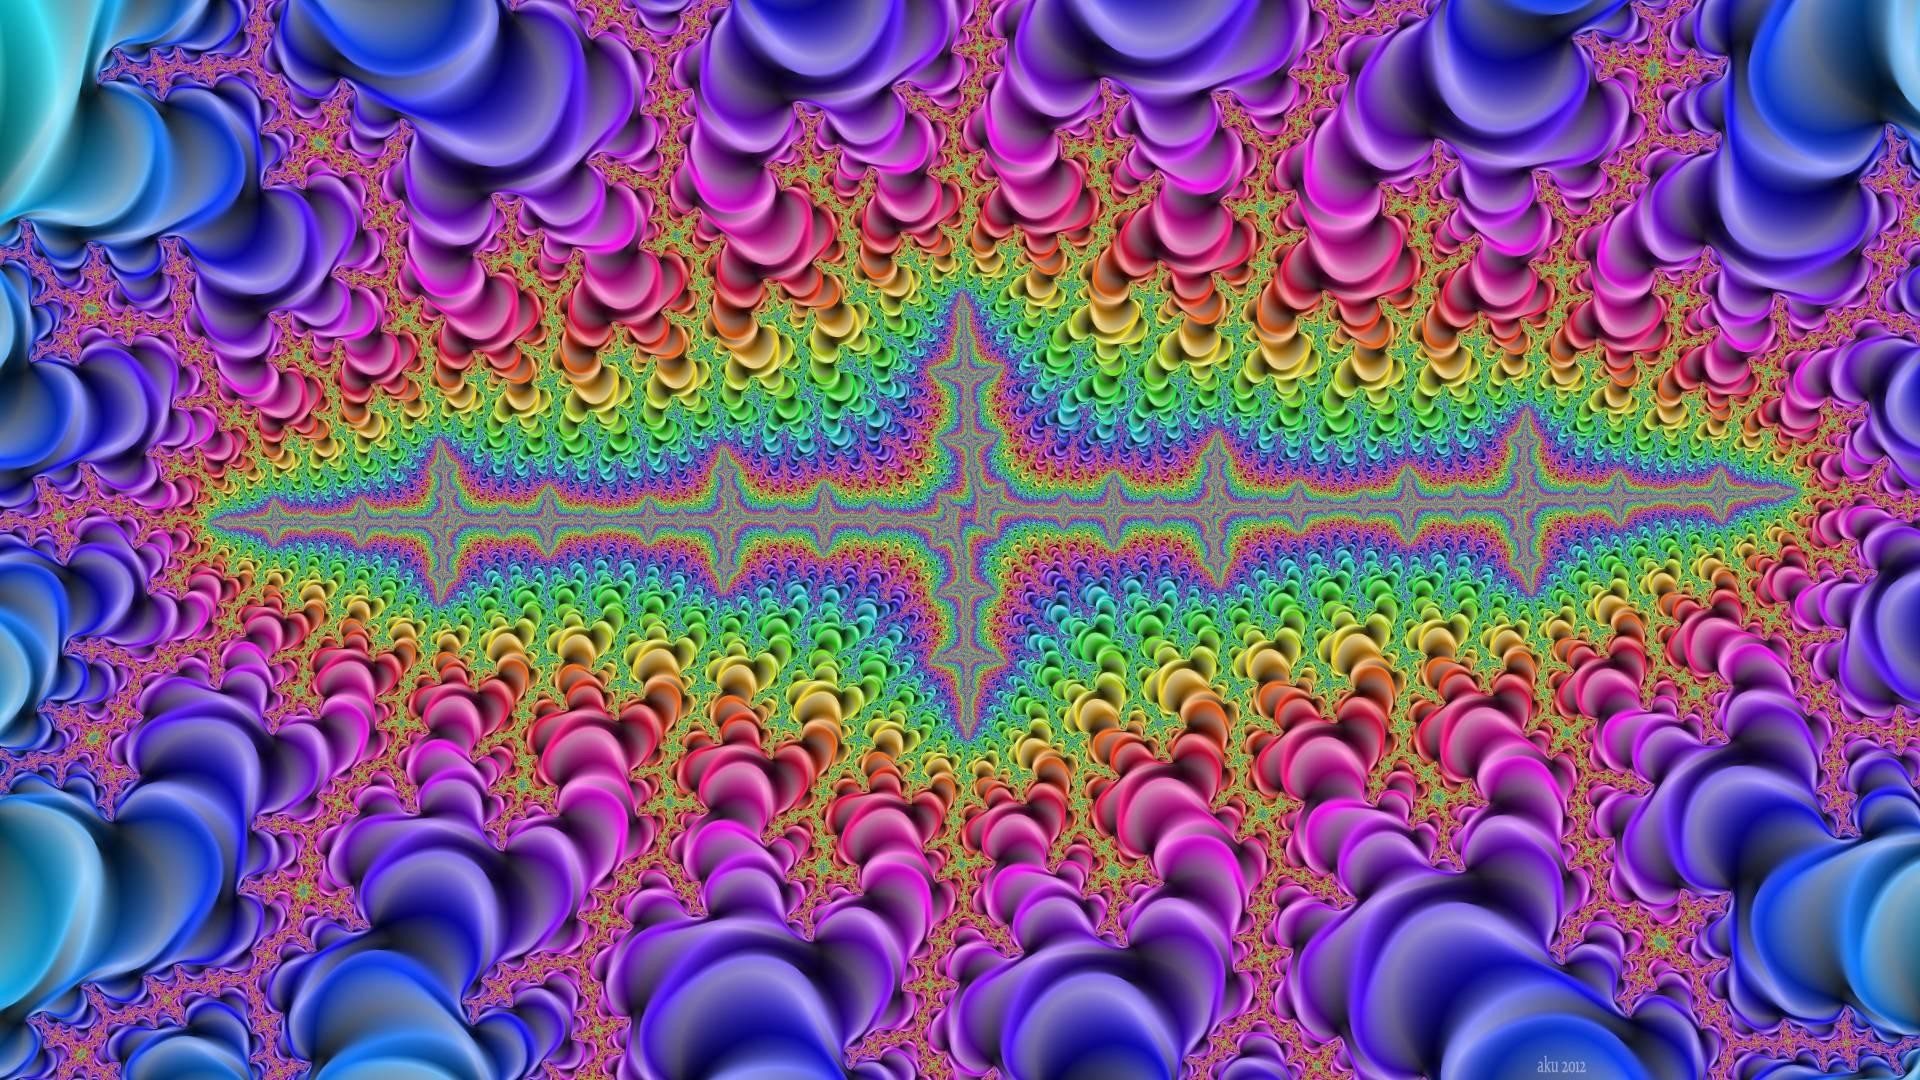 Psychedelic HD Backgrounds wallpaper wp40010951